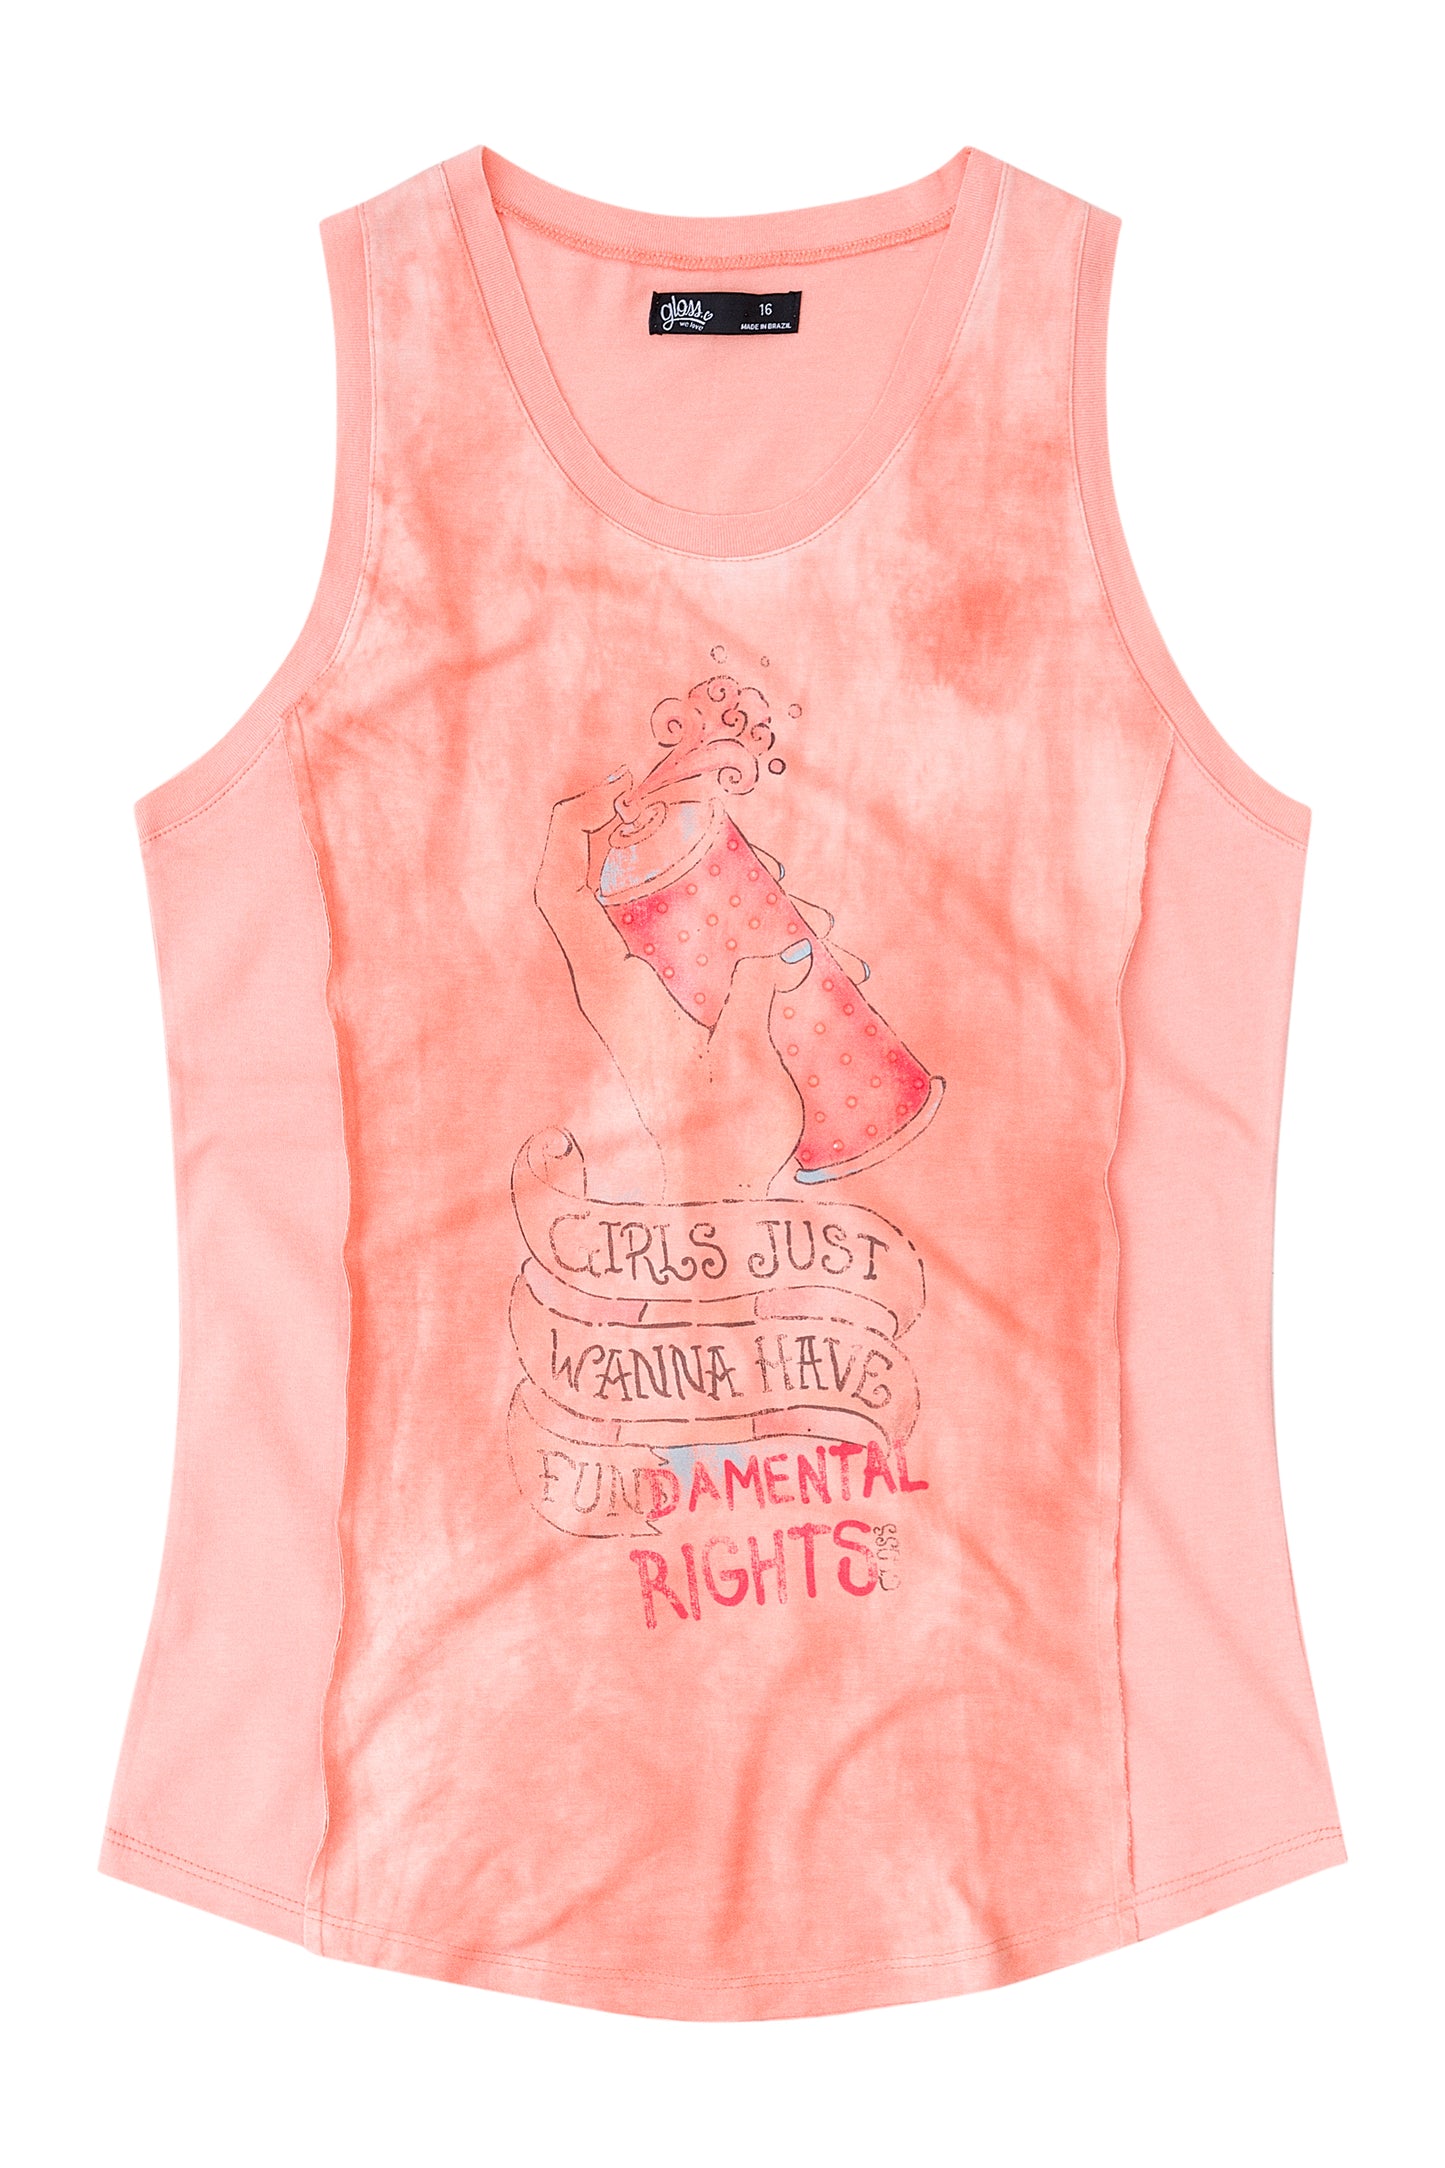 CORAL-GLOSS CAMISOLE 14 TO 16 YEARS